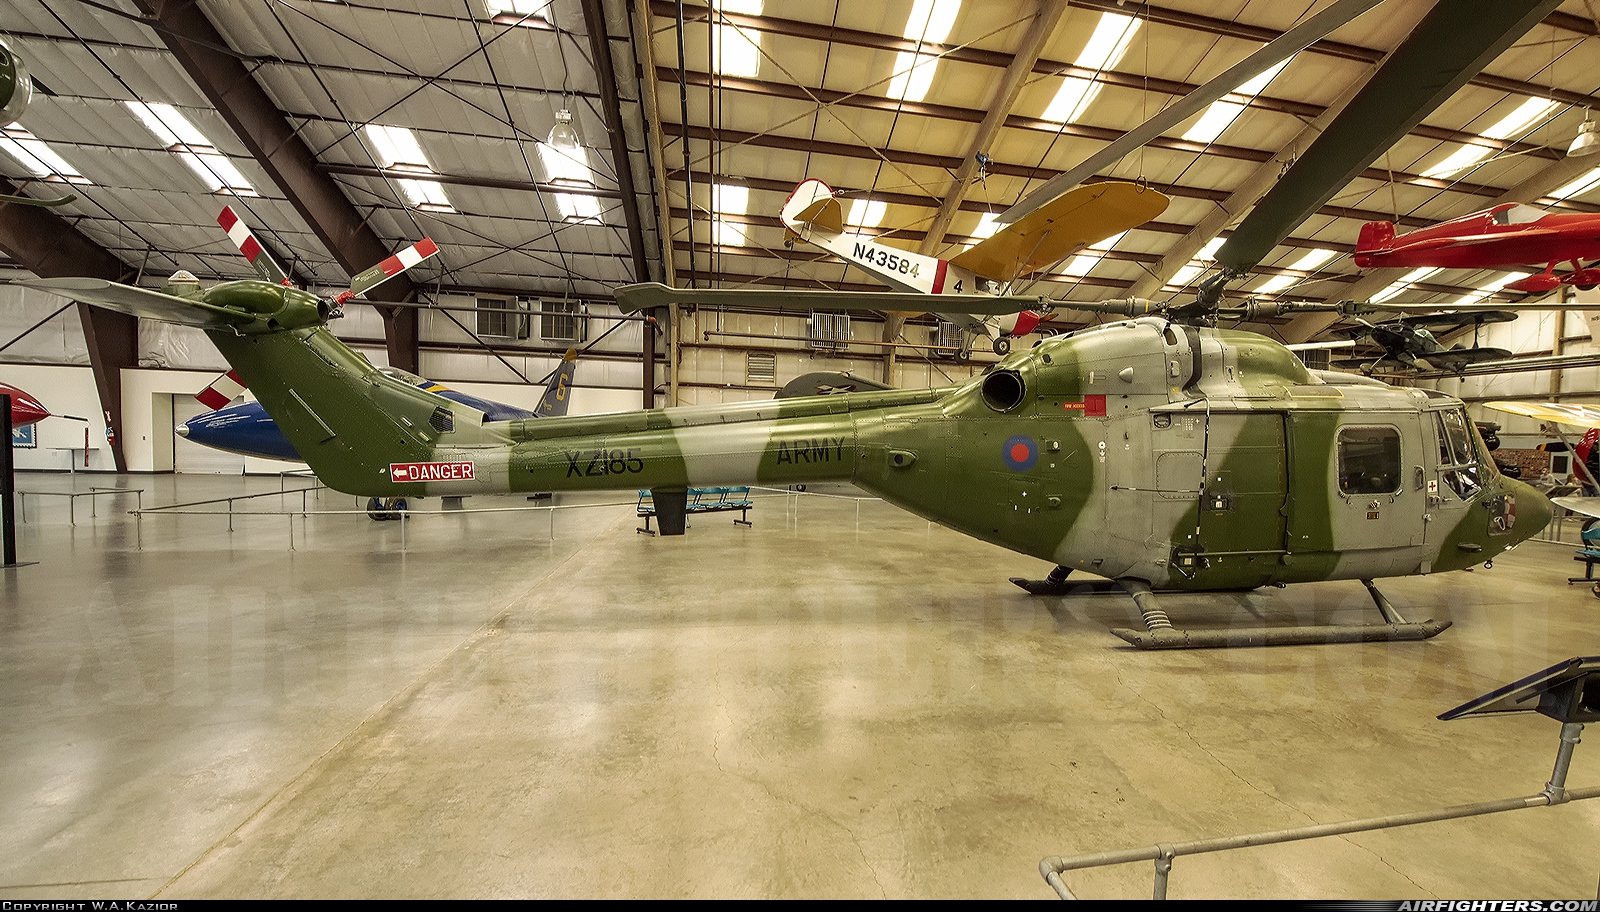 UK - Army Westland WG-13 Lynx AH7 XZ185 at Tucson - Pima Air and Space Museum, USA